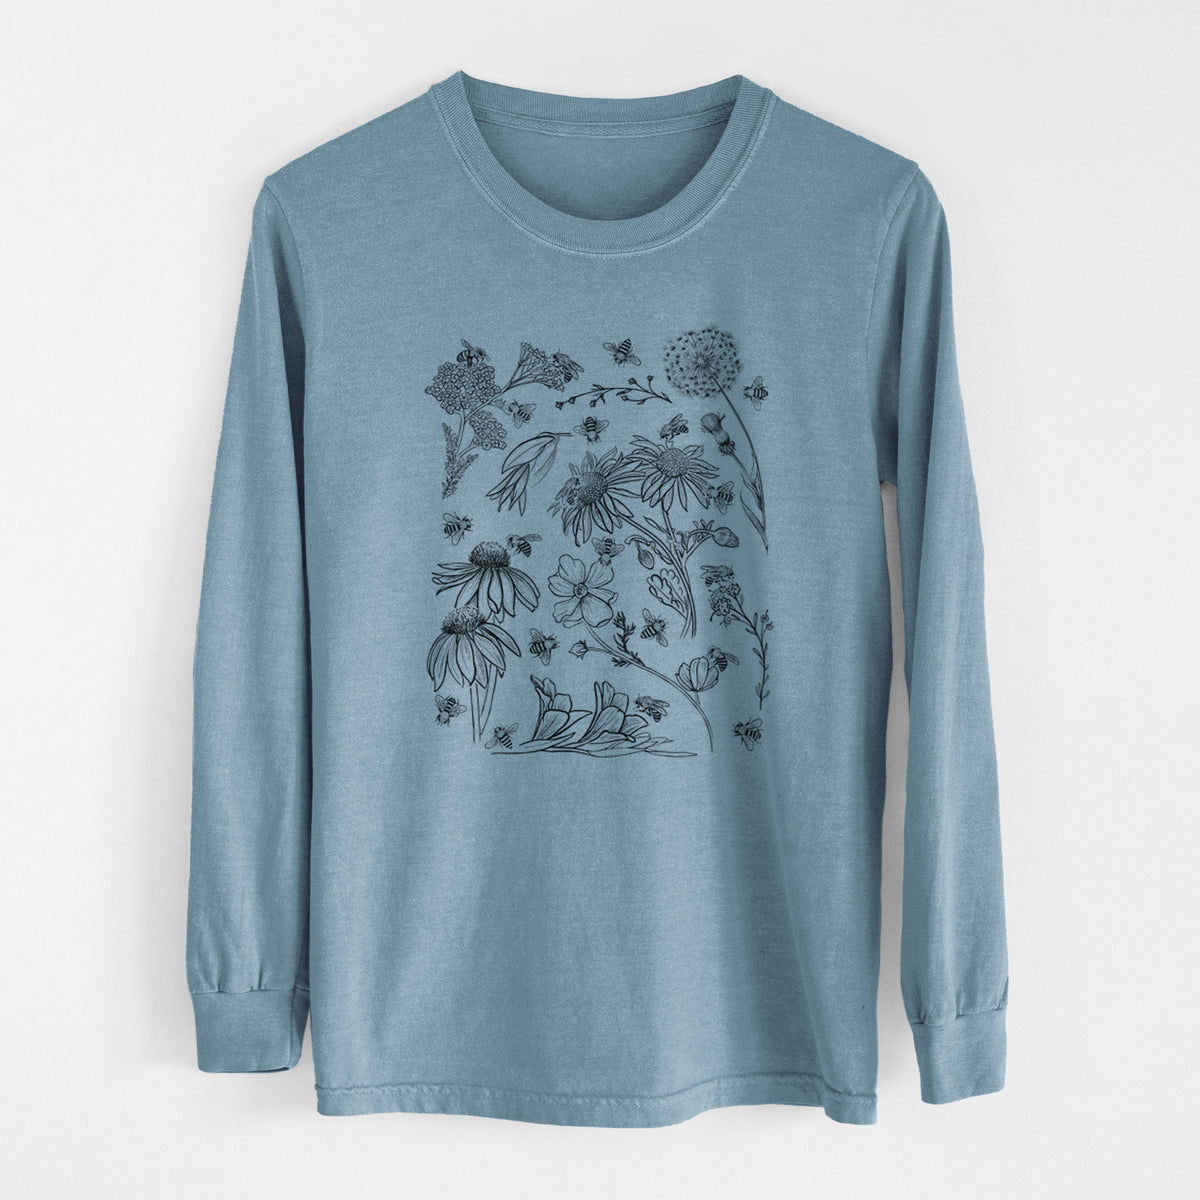 Bees &amp; Blooms - Honeybees with Wildflowers - Heavyweight 100% Cotton Long Sleeve